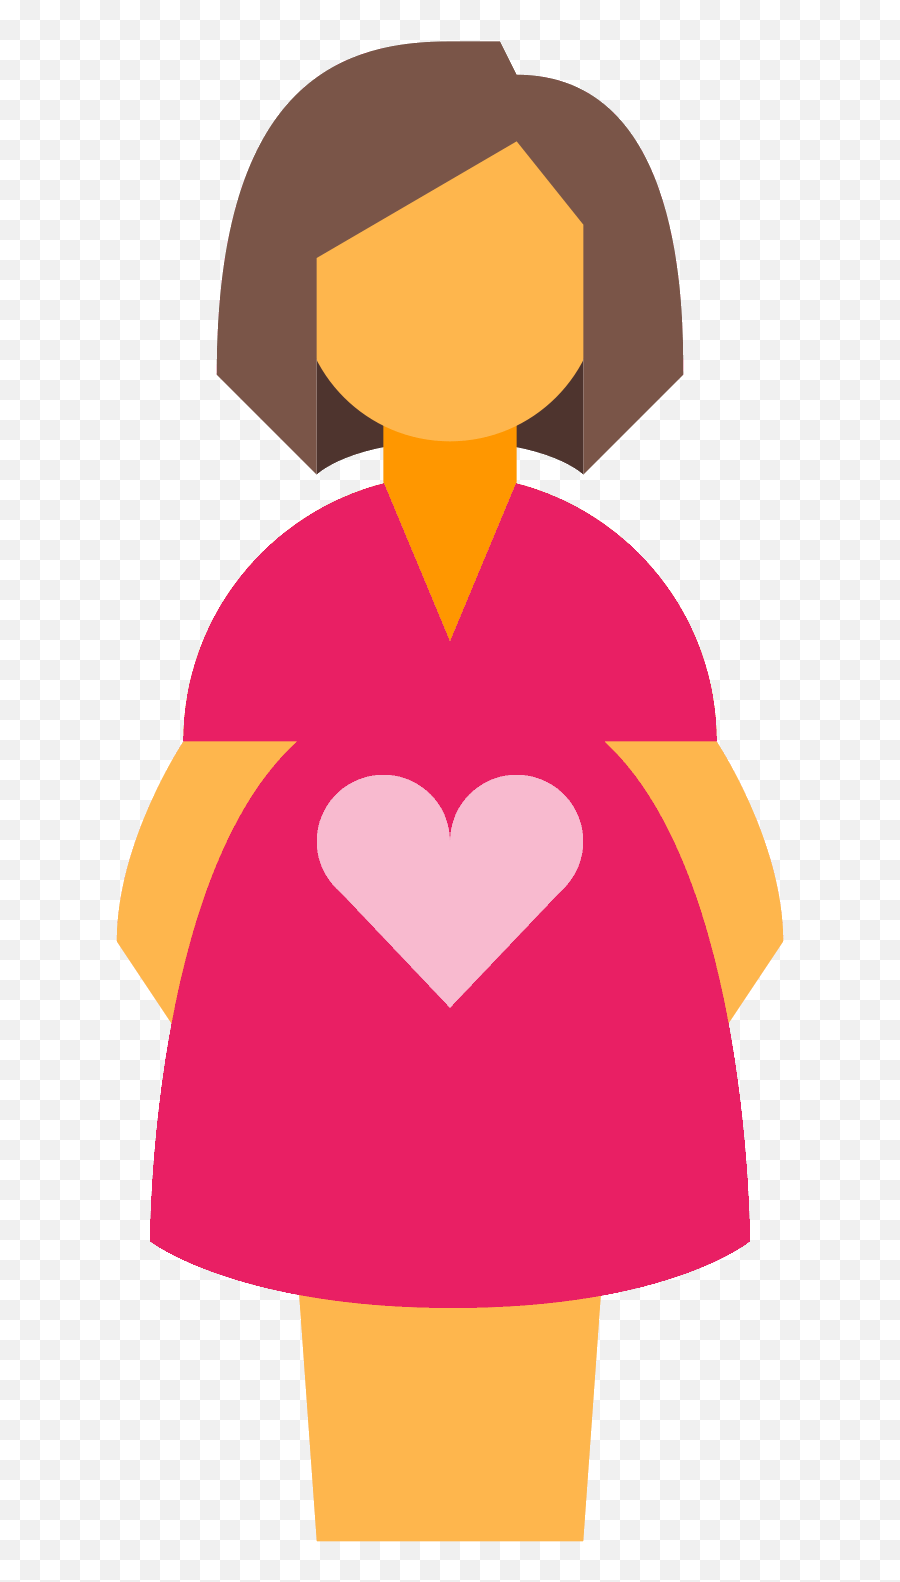 The Icon Pregnant Is A Stick Figure Of A Female With - Pregnancy Emoji,Emoji Stick Figures